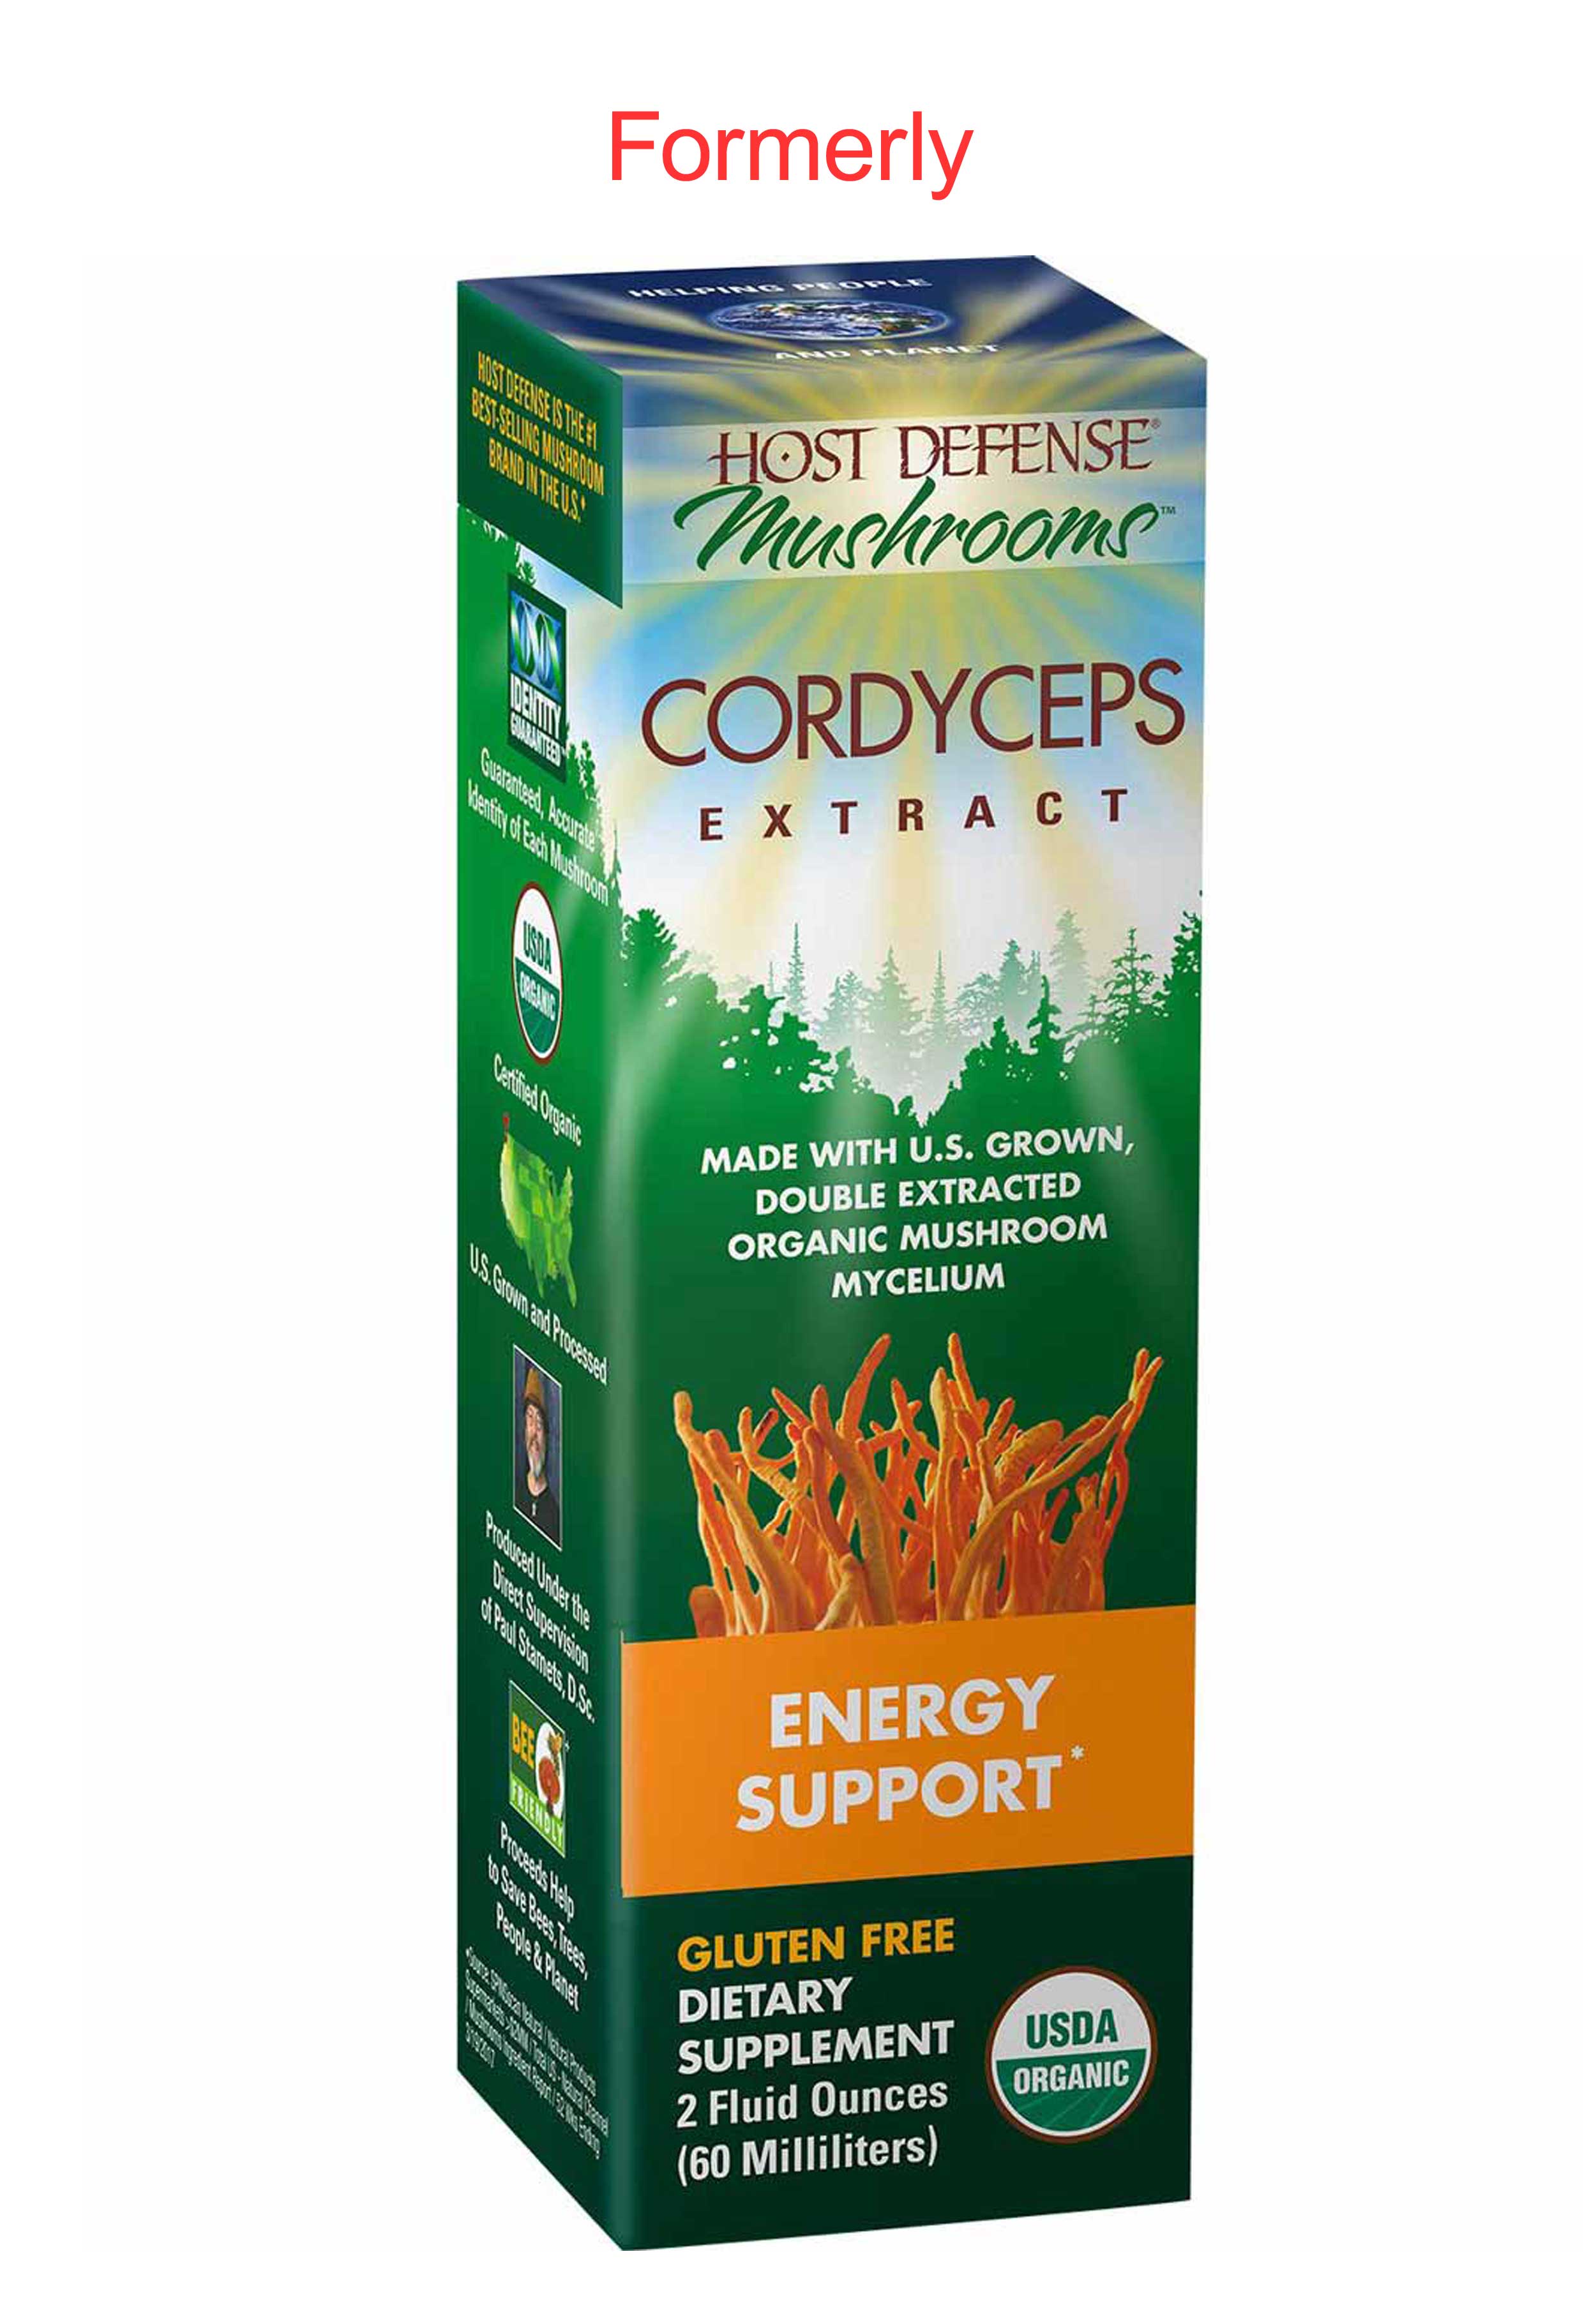 Host Defense Cordyceps Extract Formerly